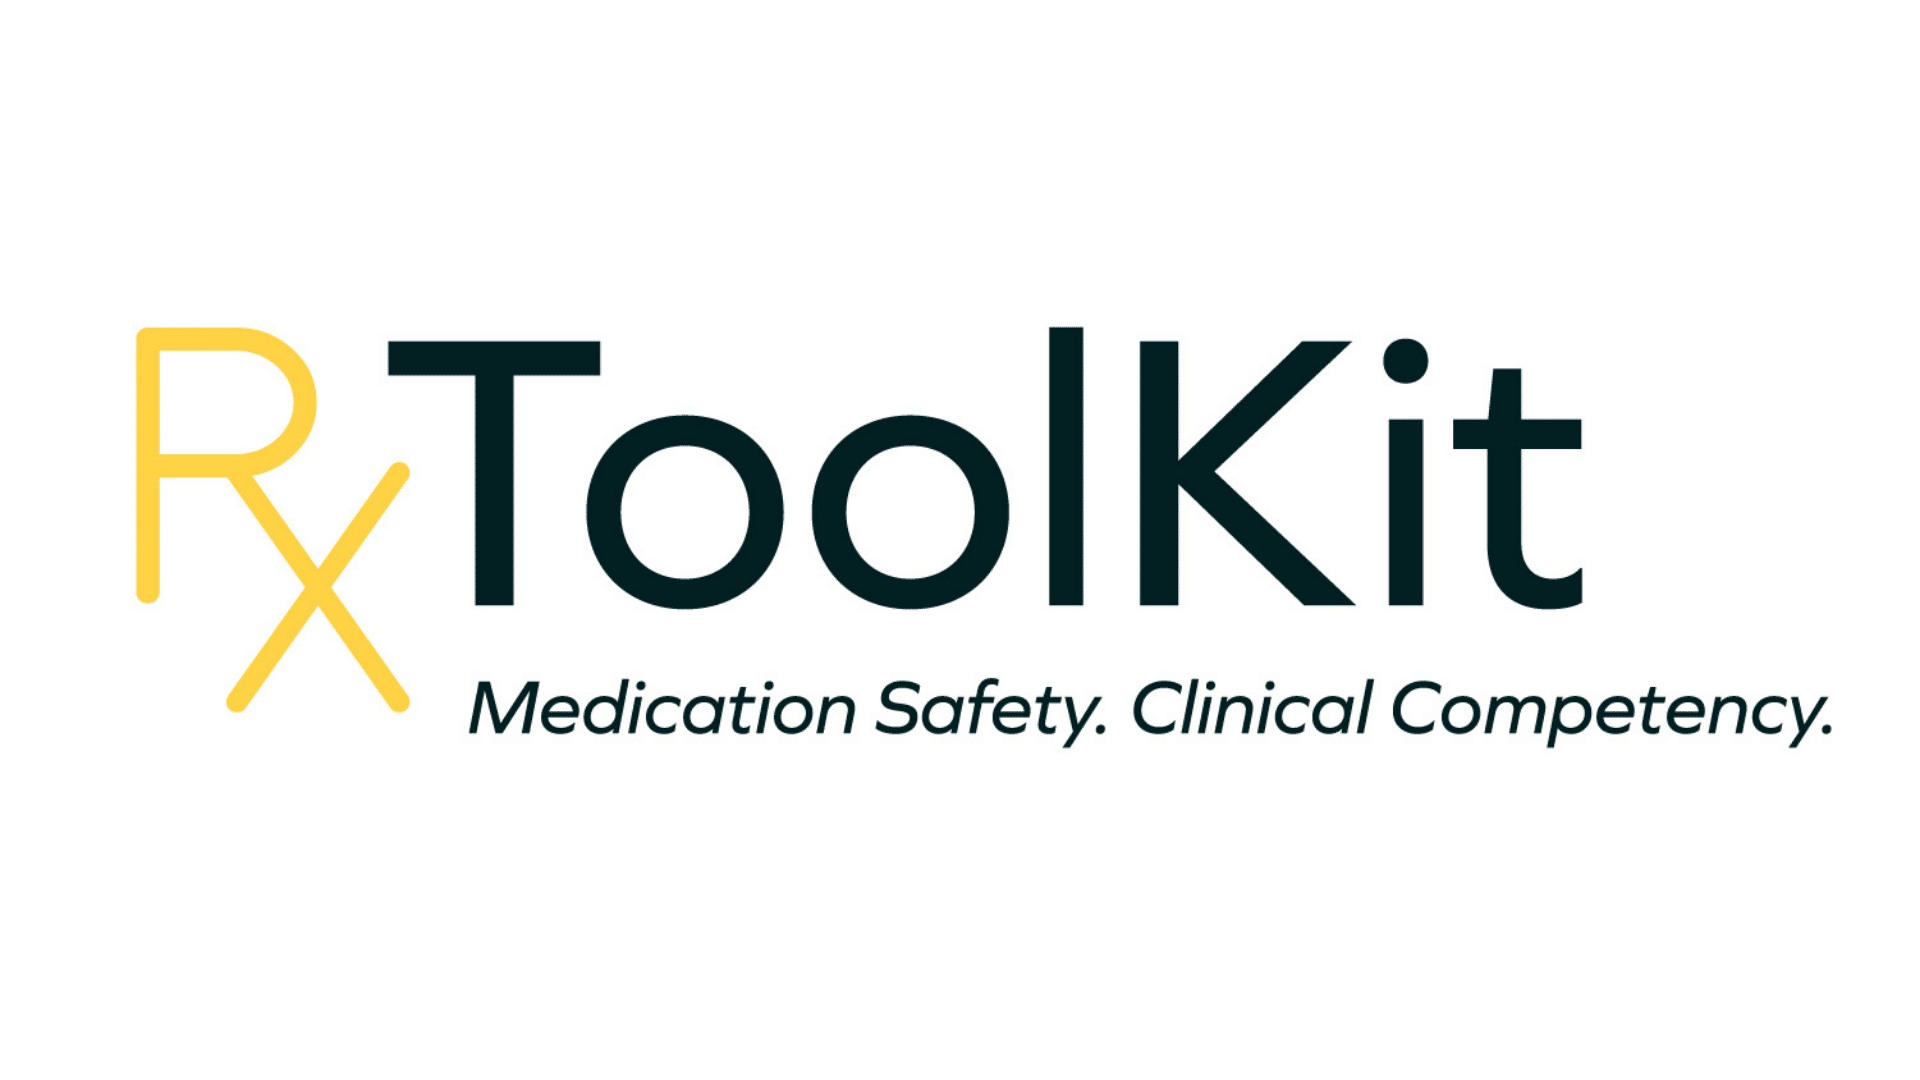 Medication safety- RxToolKit